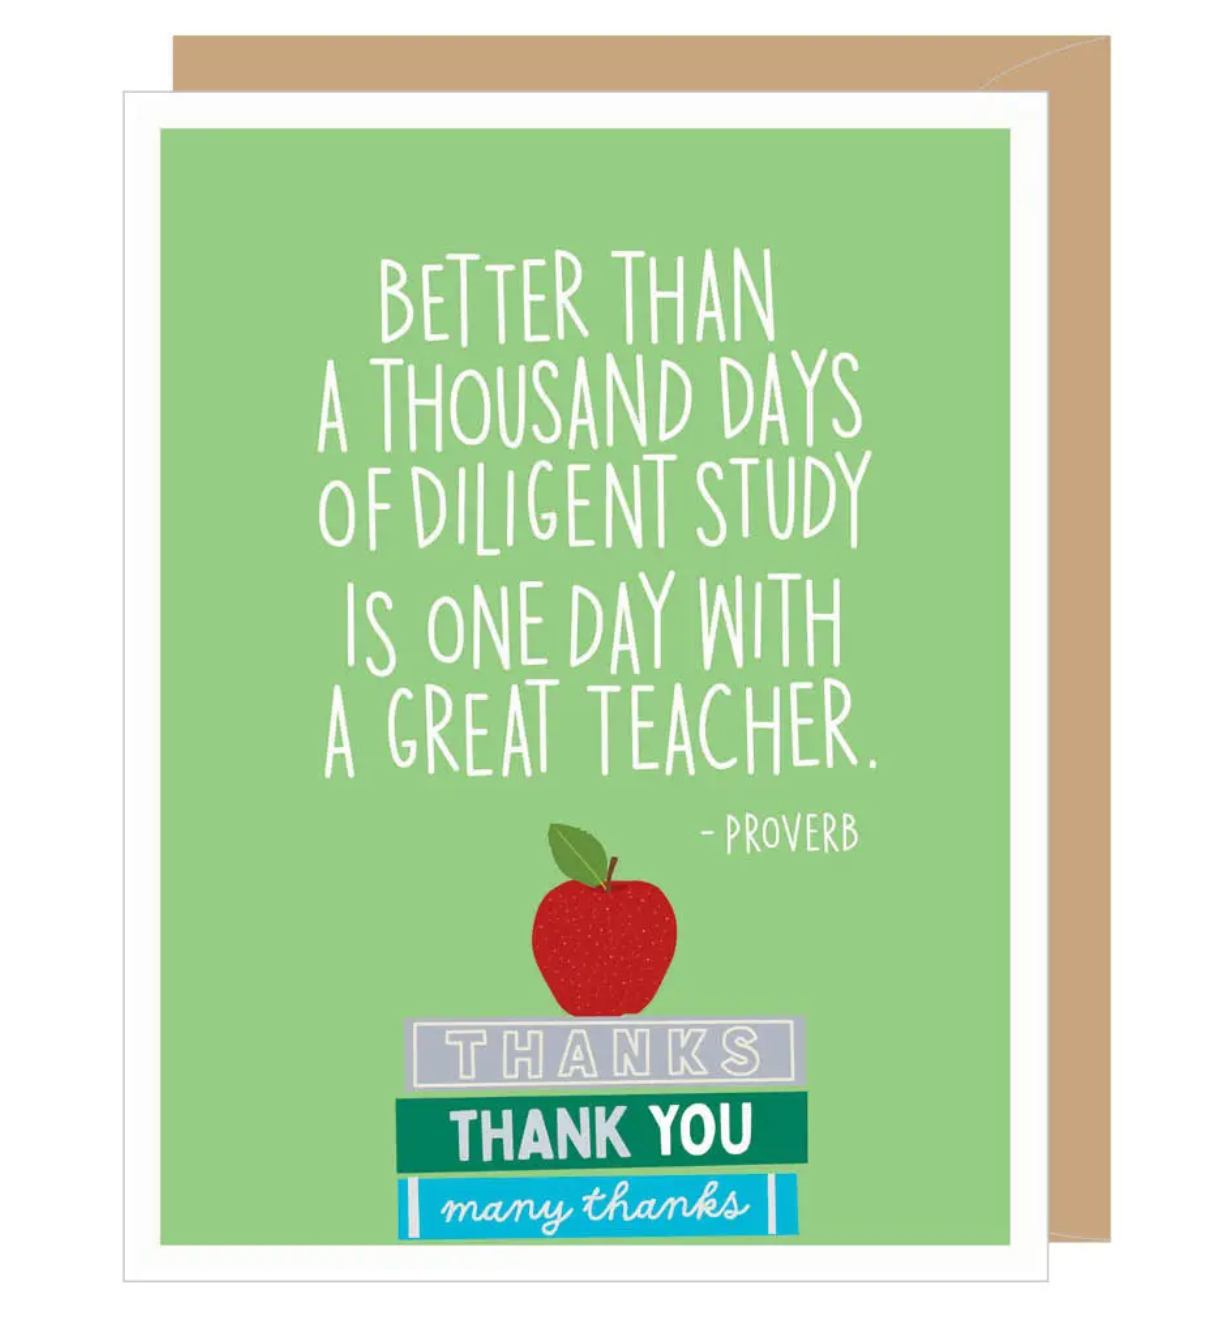 One Day with a Great Teacher Card